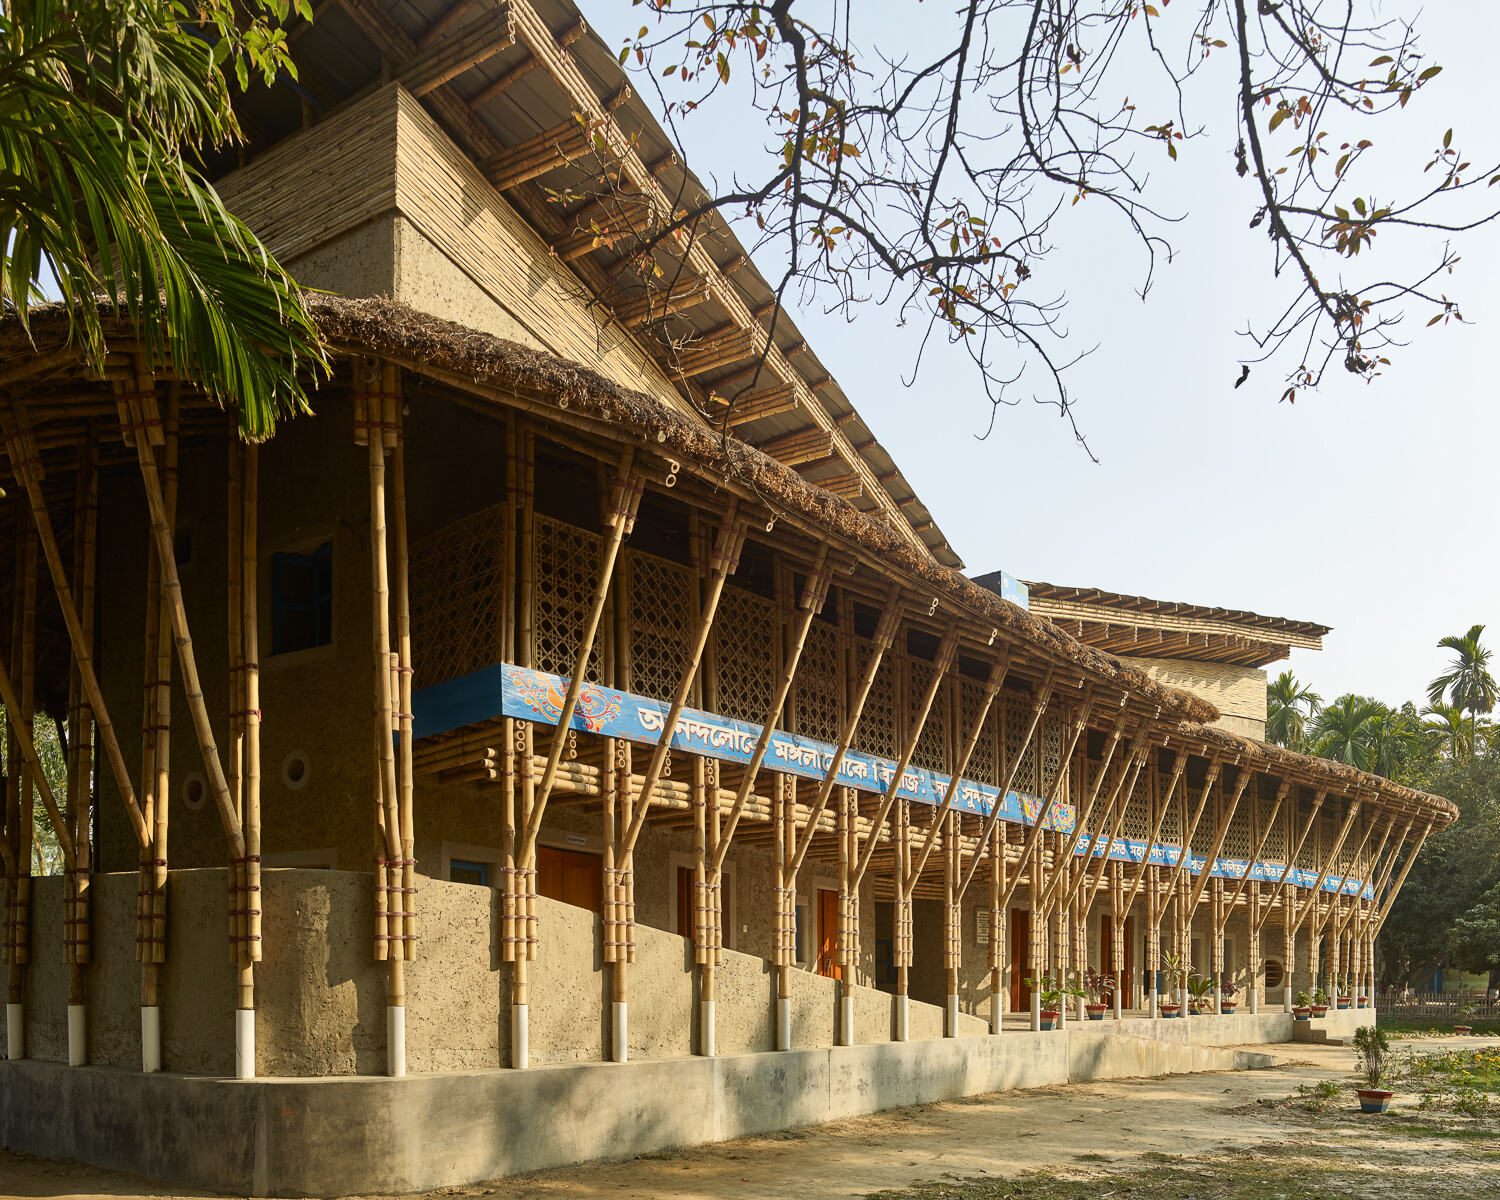 The Anandaloy Building, in Rudrapur Bangladesh, is made out of wood, ceramic, and bamboo, 